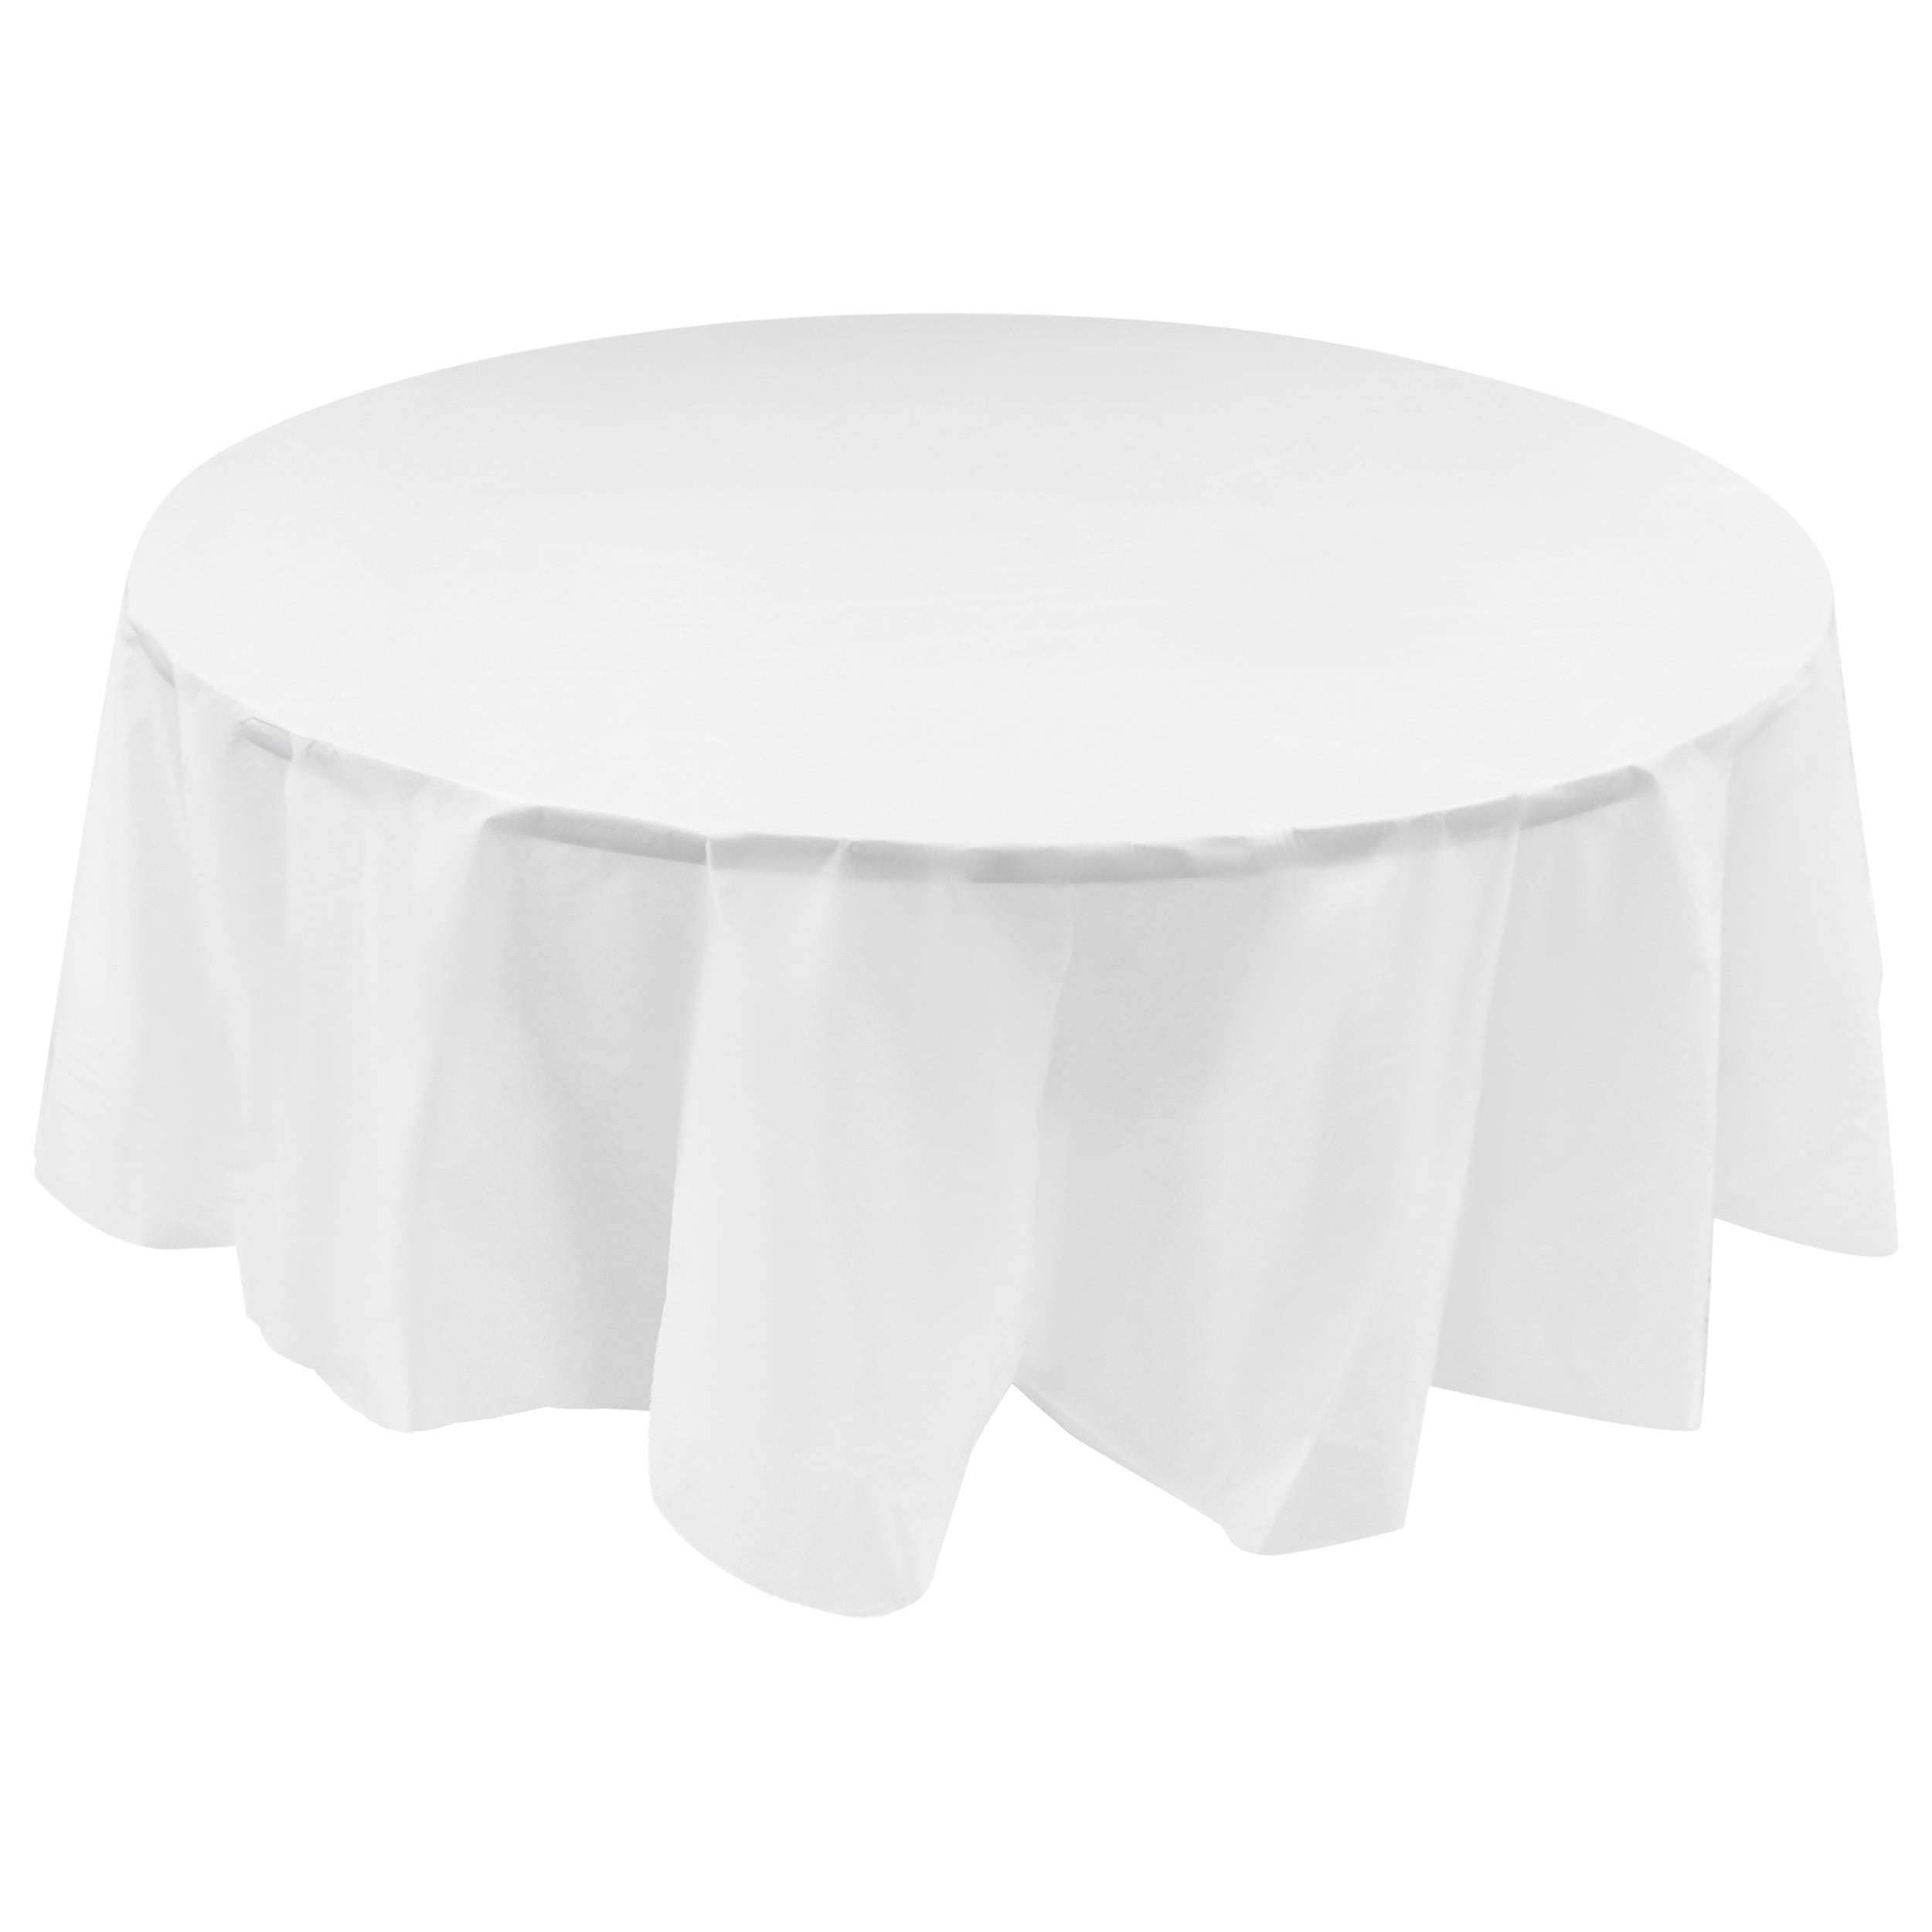 12Pk Round 84 IN Disposable Party Table Cover Lot45 White Plastic Tablecloths